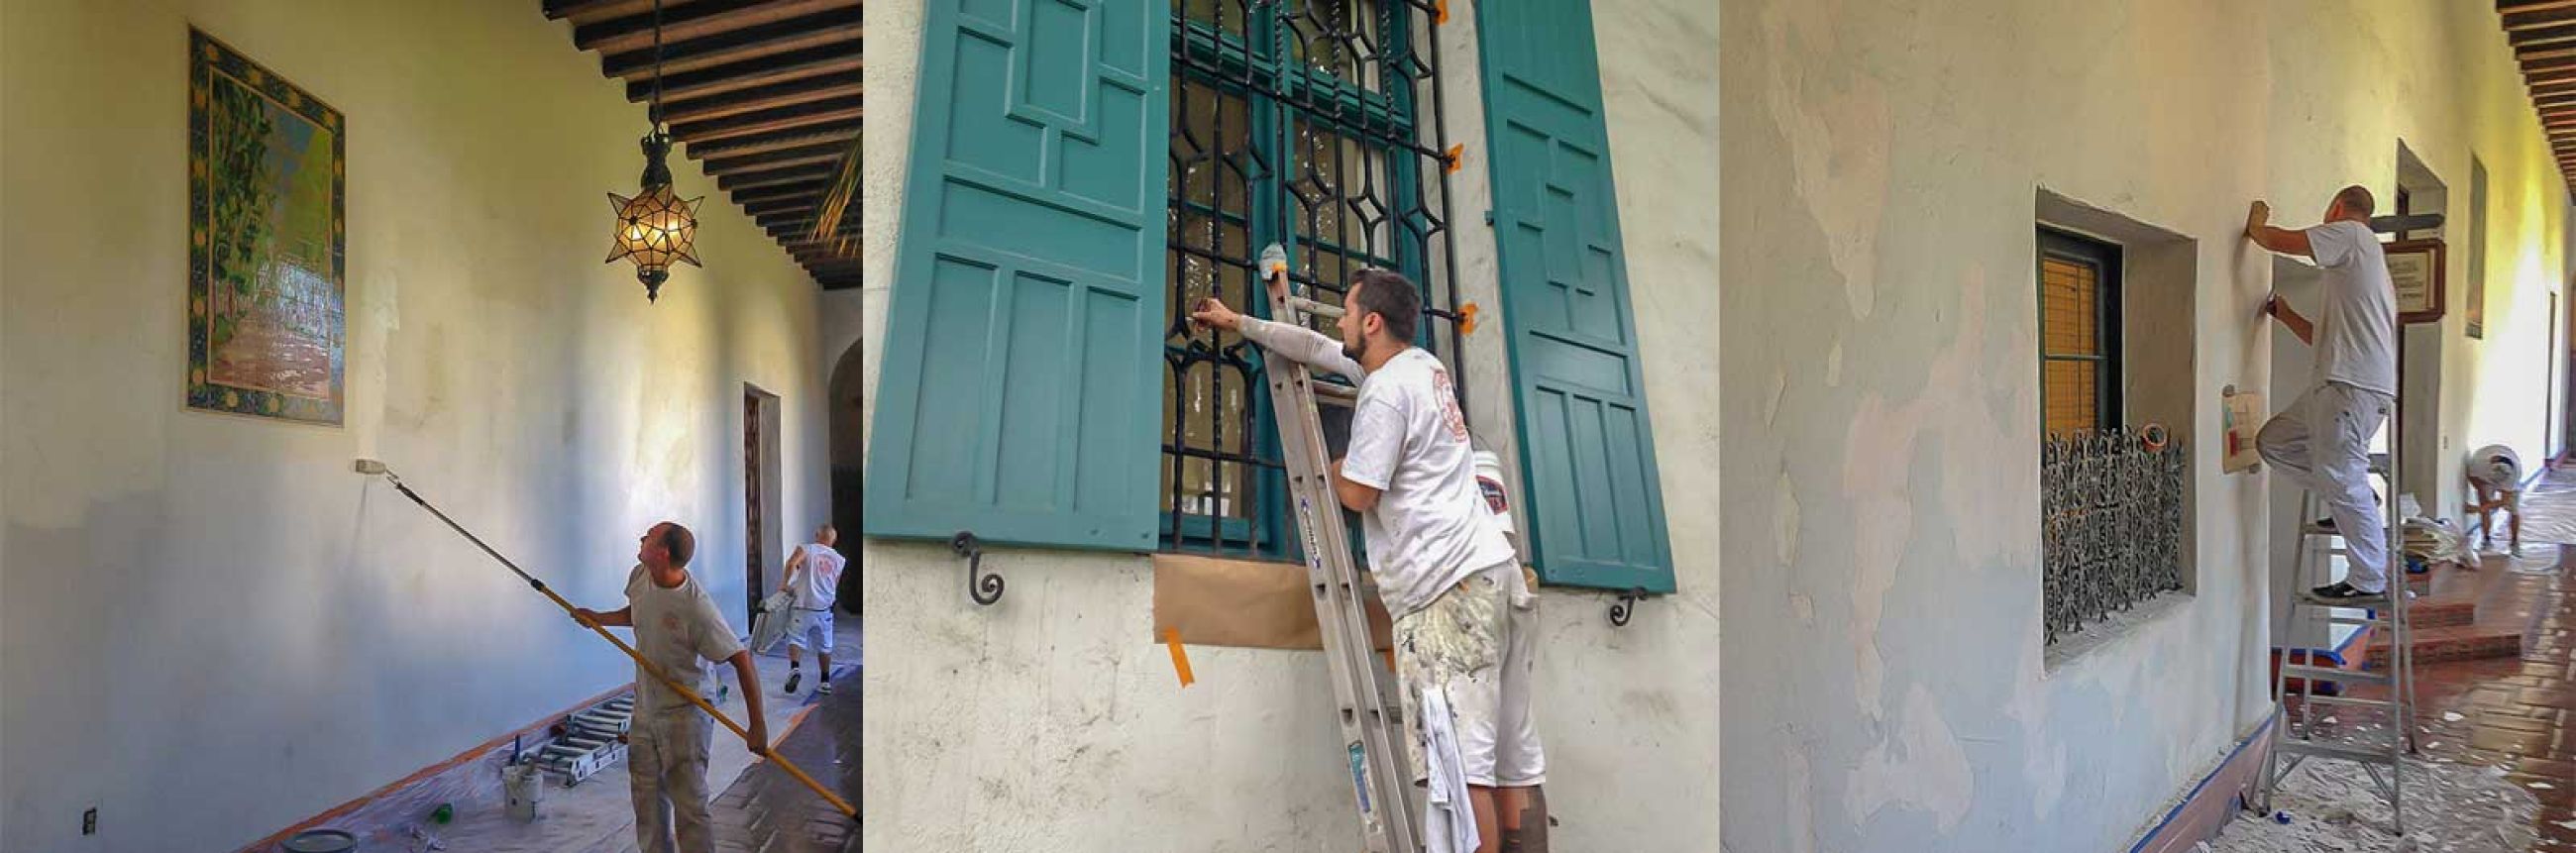 Proudly offering professional painting services in Santa Barbara and the surrounding areas